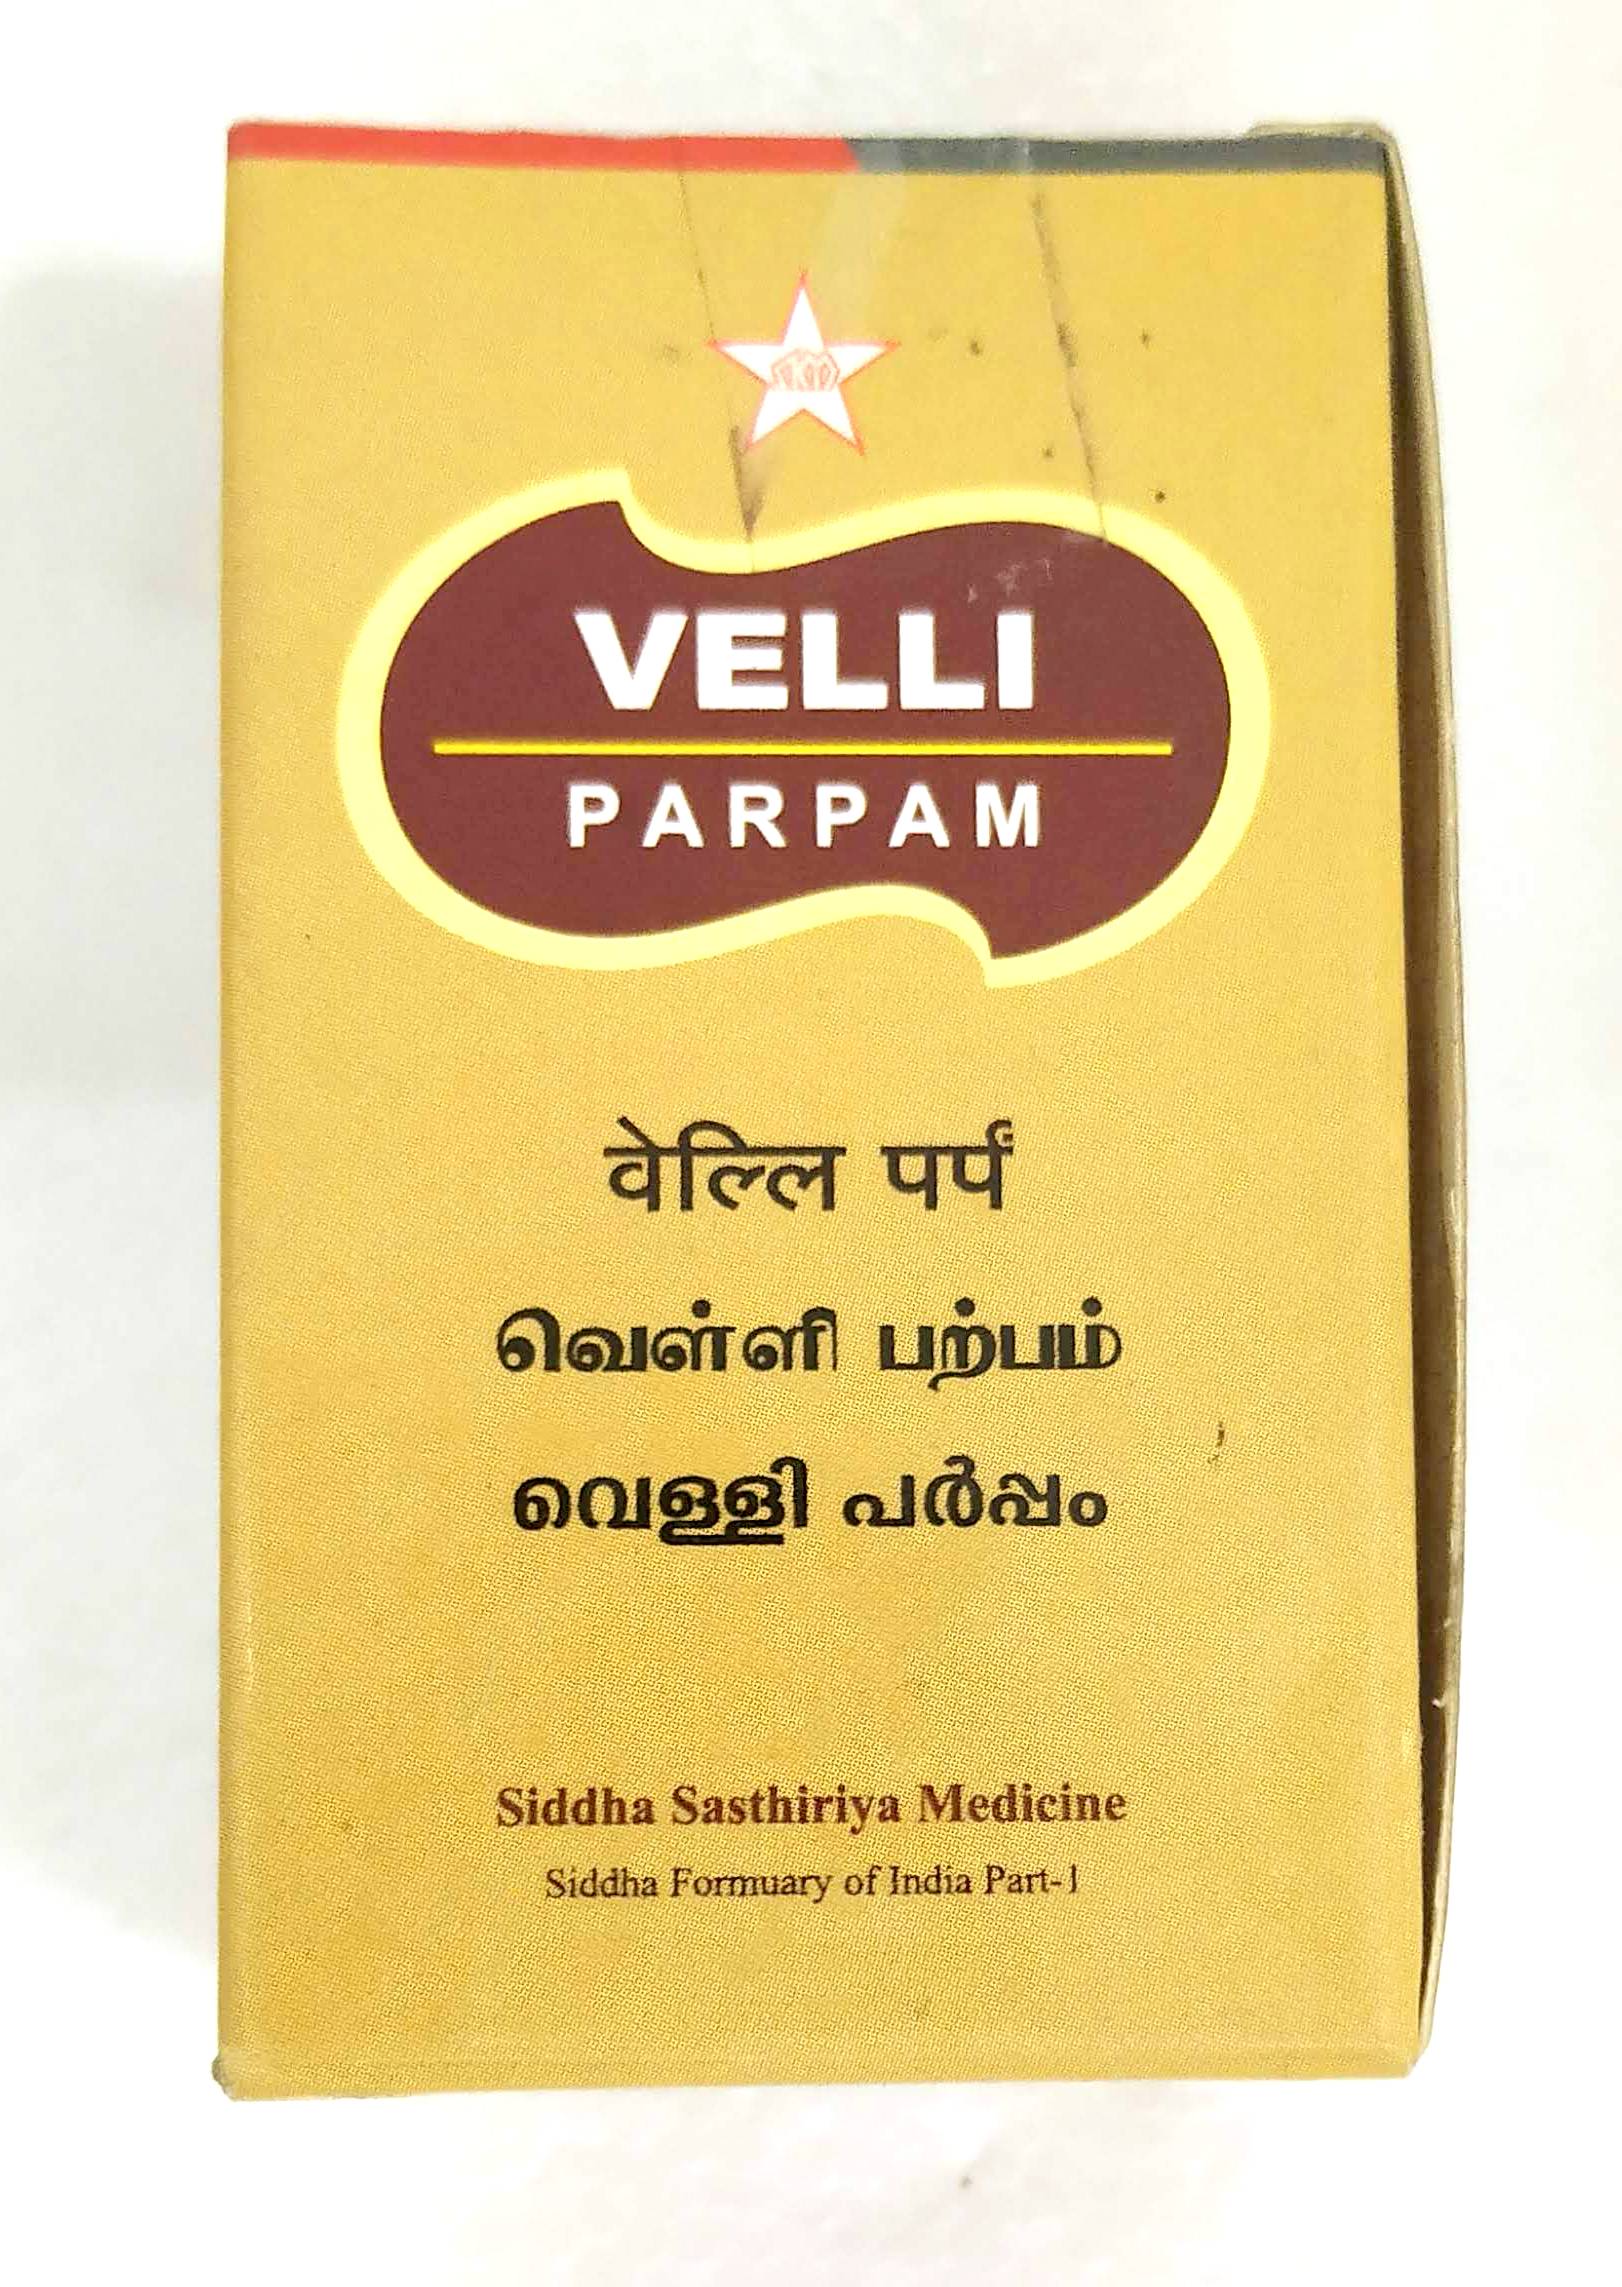 Shop SKM Velli Parpam 2gm at price 1020.00 from SKM Online - Ayush Care